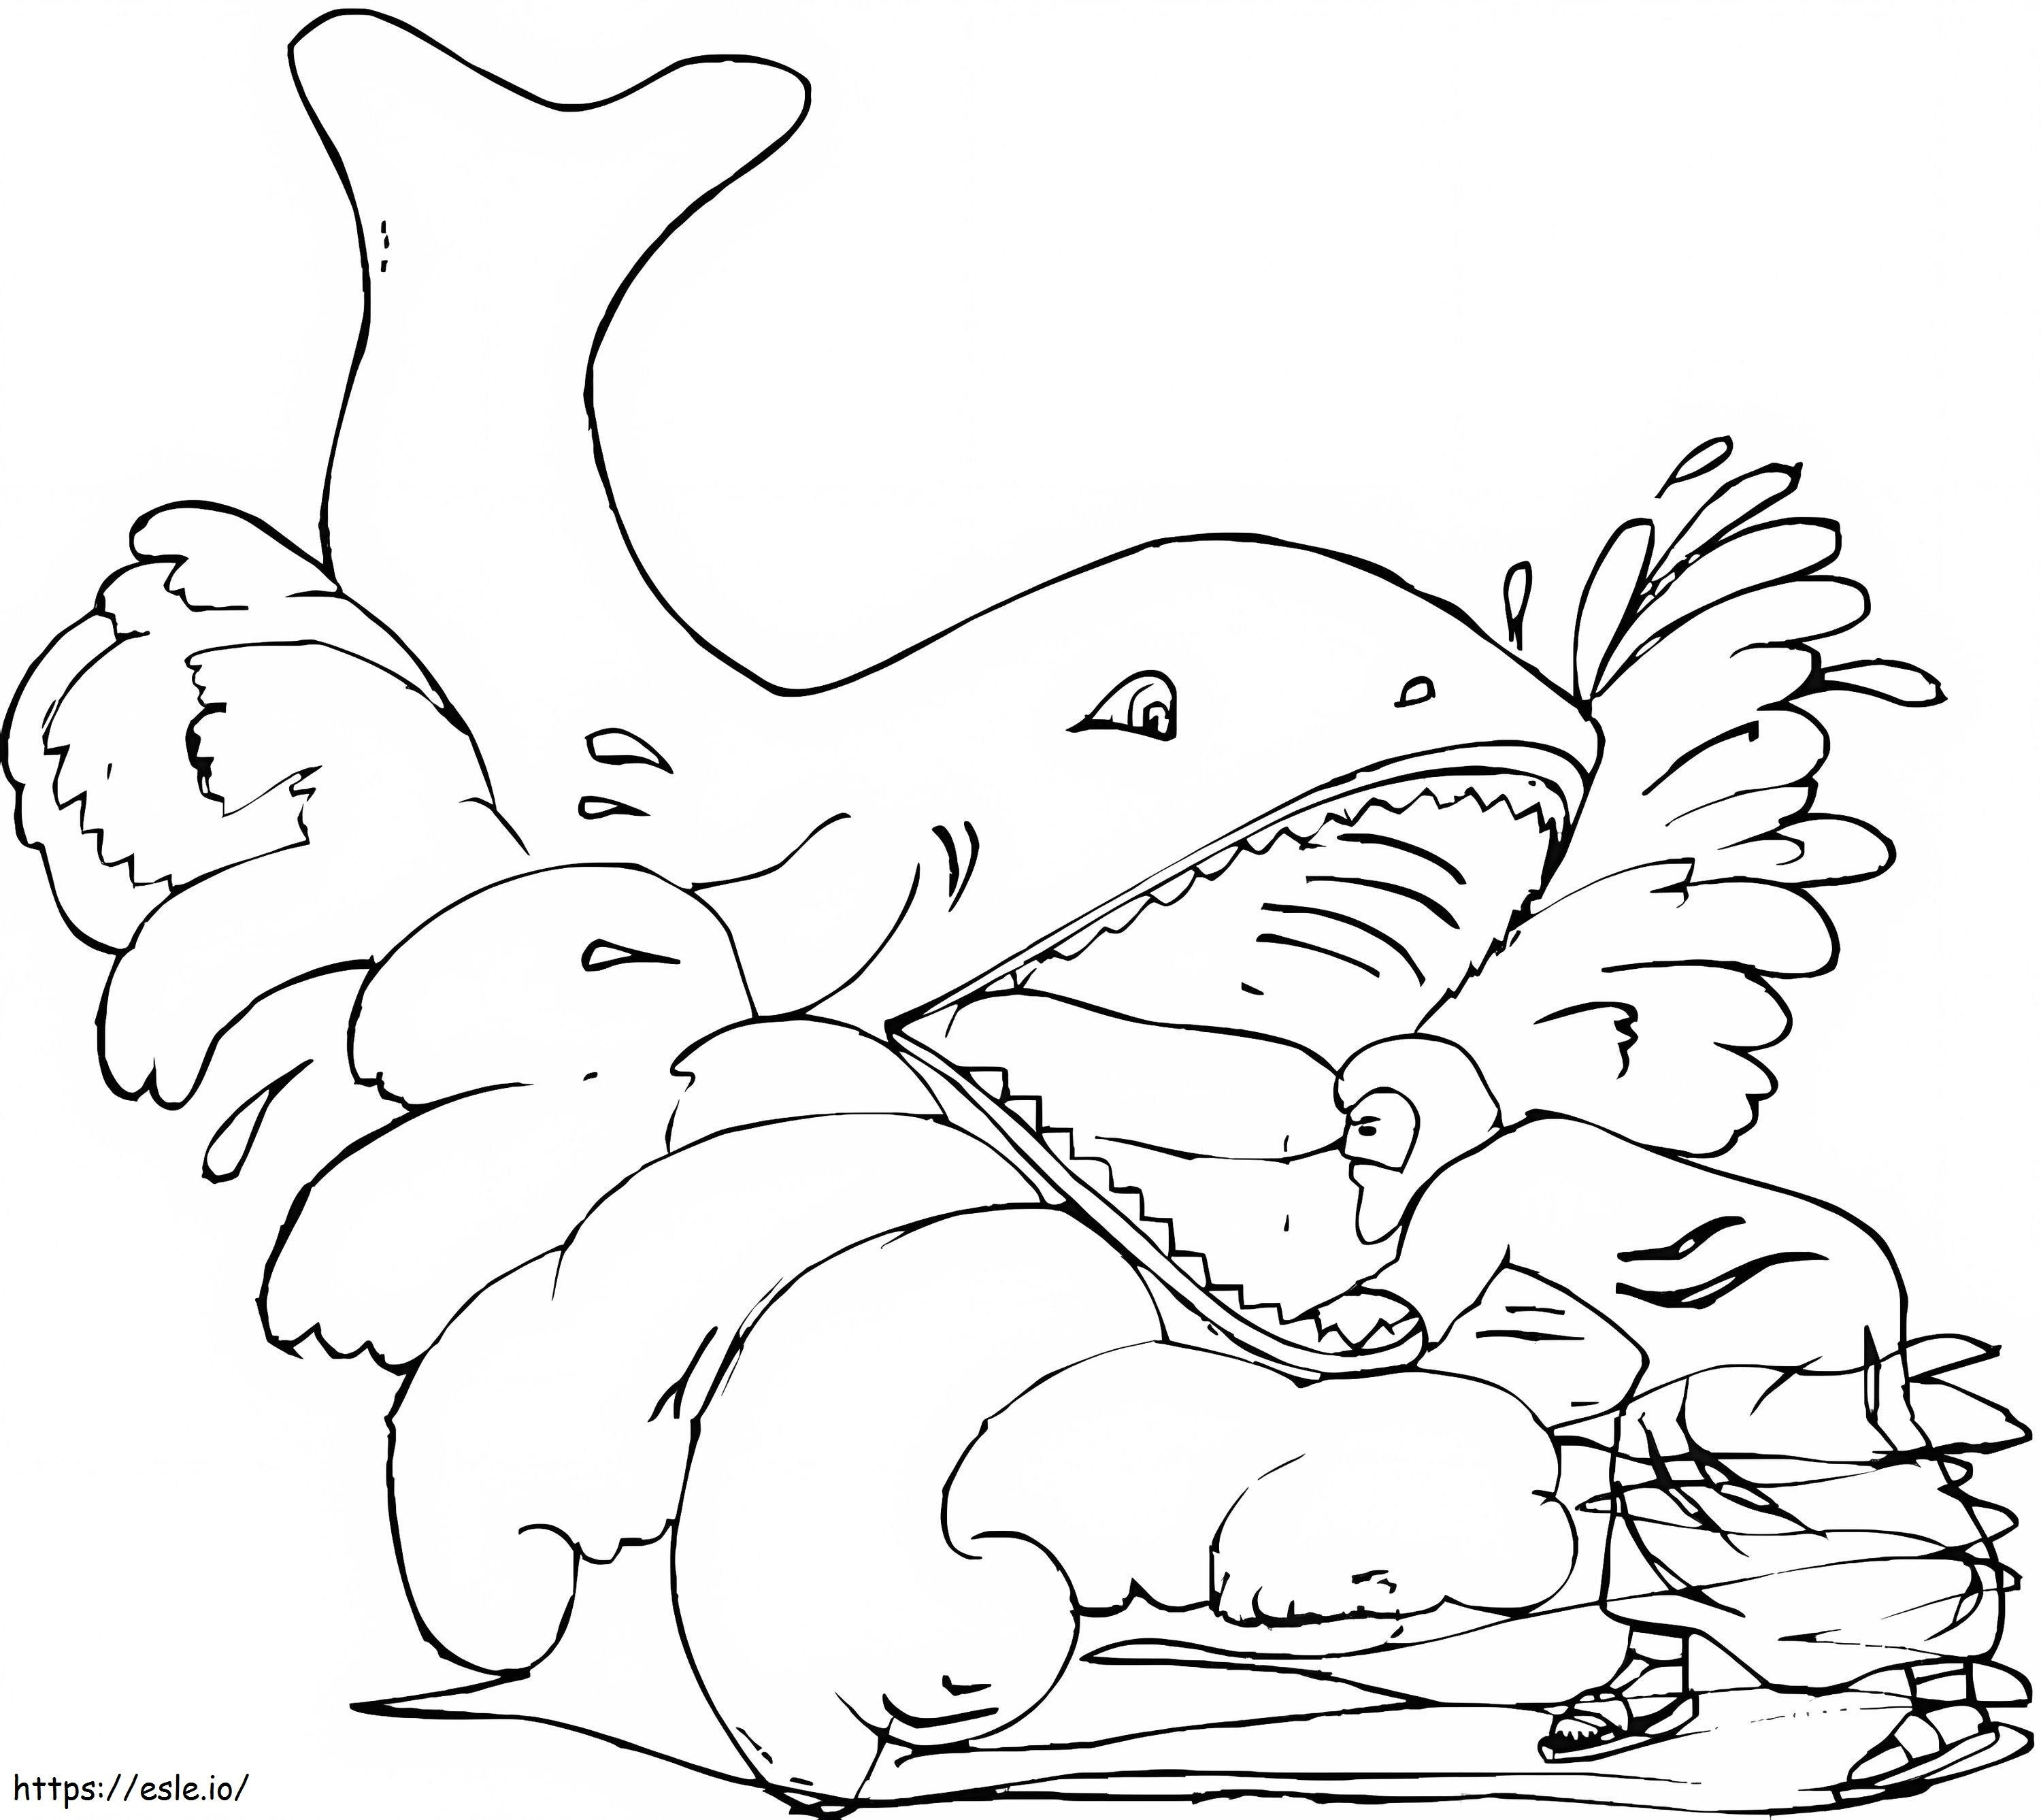 In The Mouth Of Whale coloring page